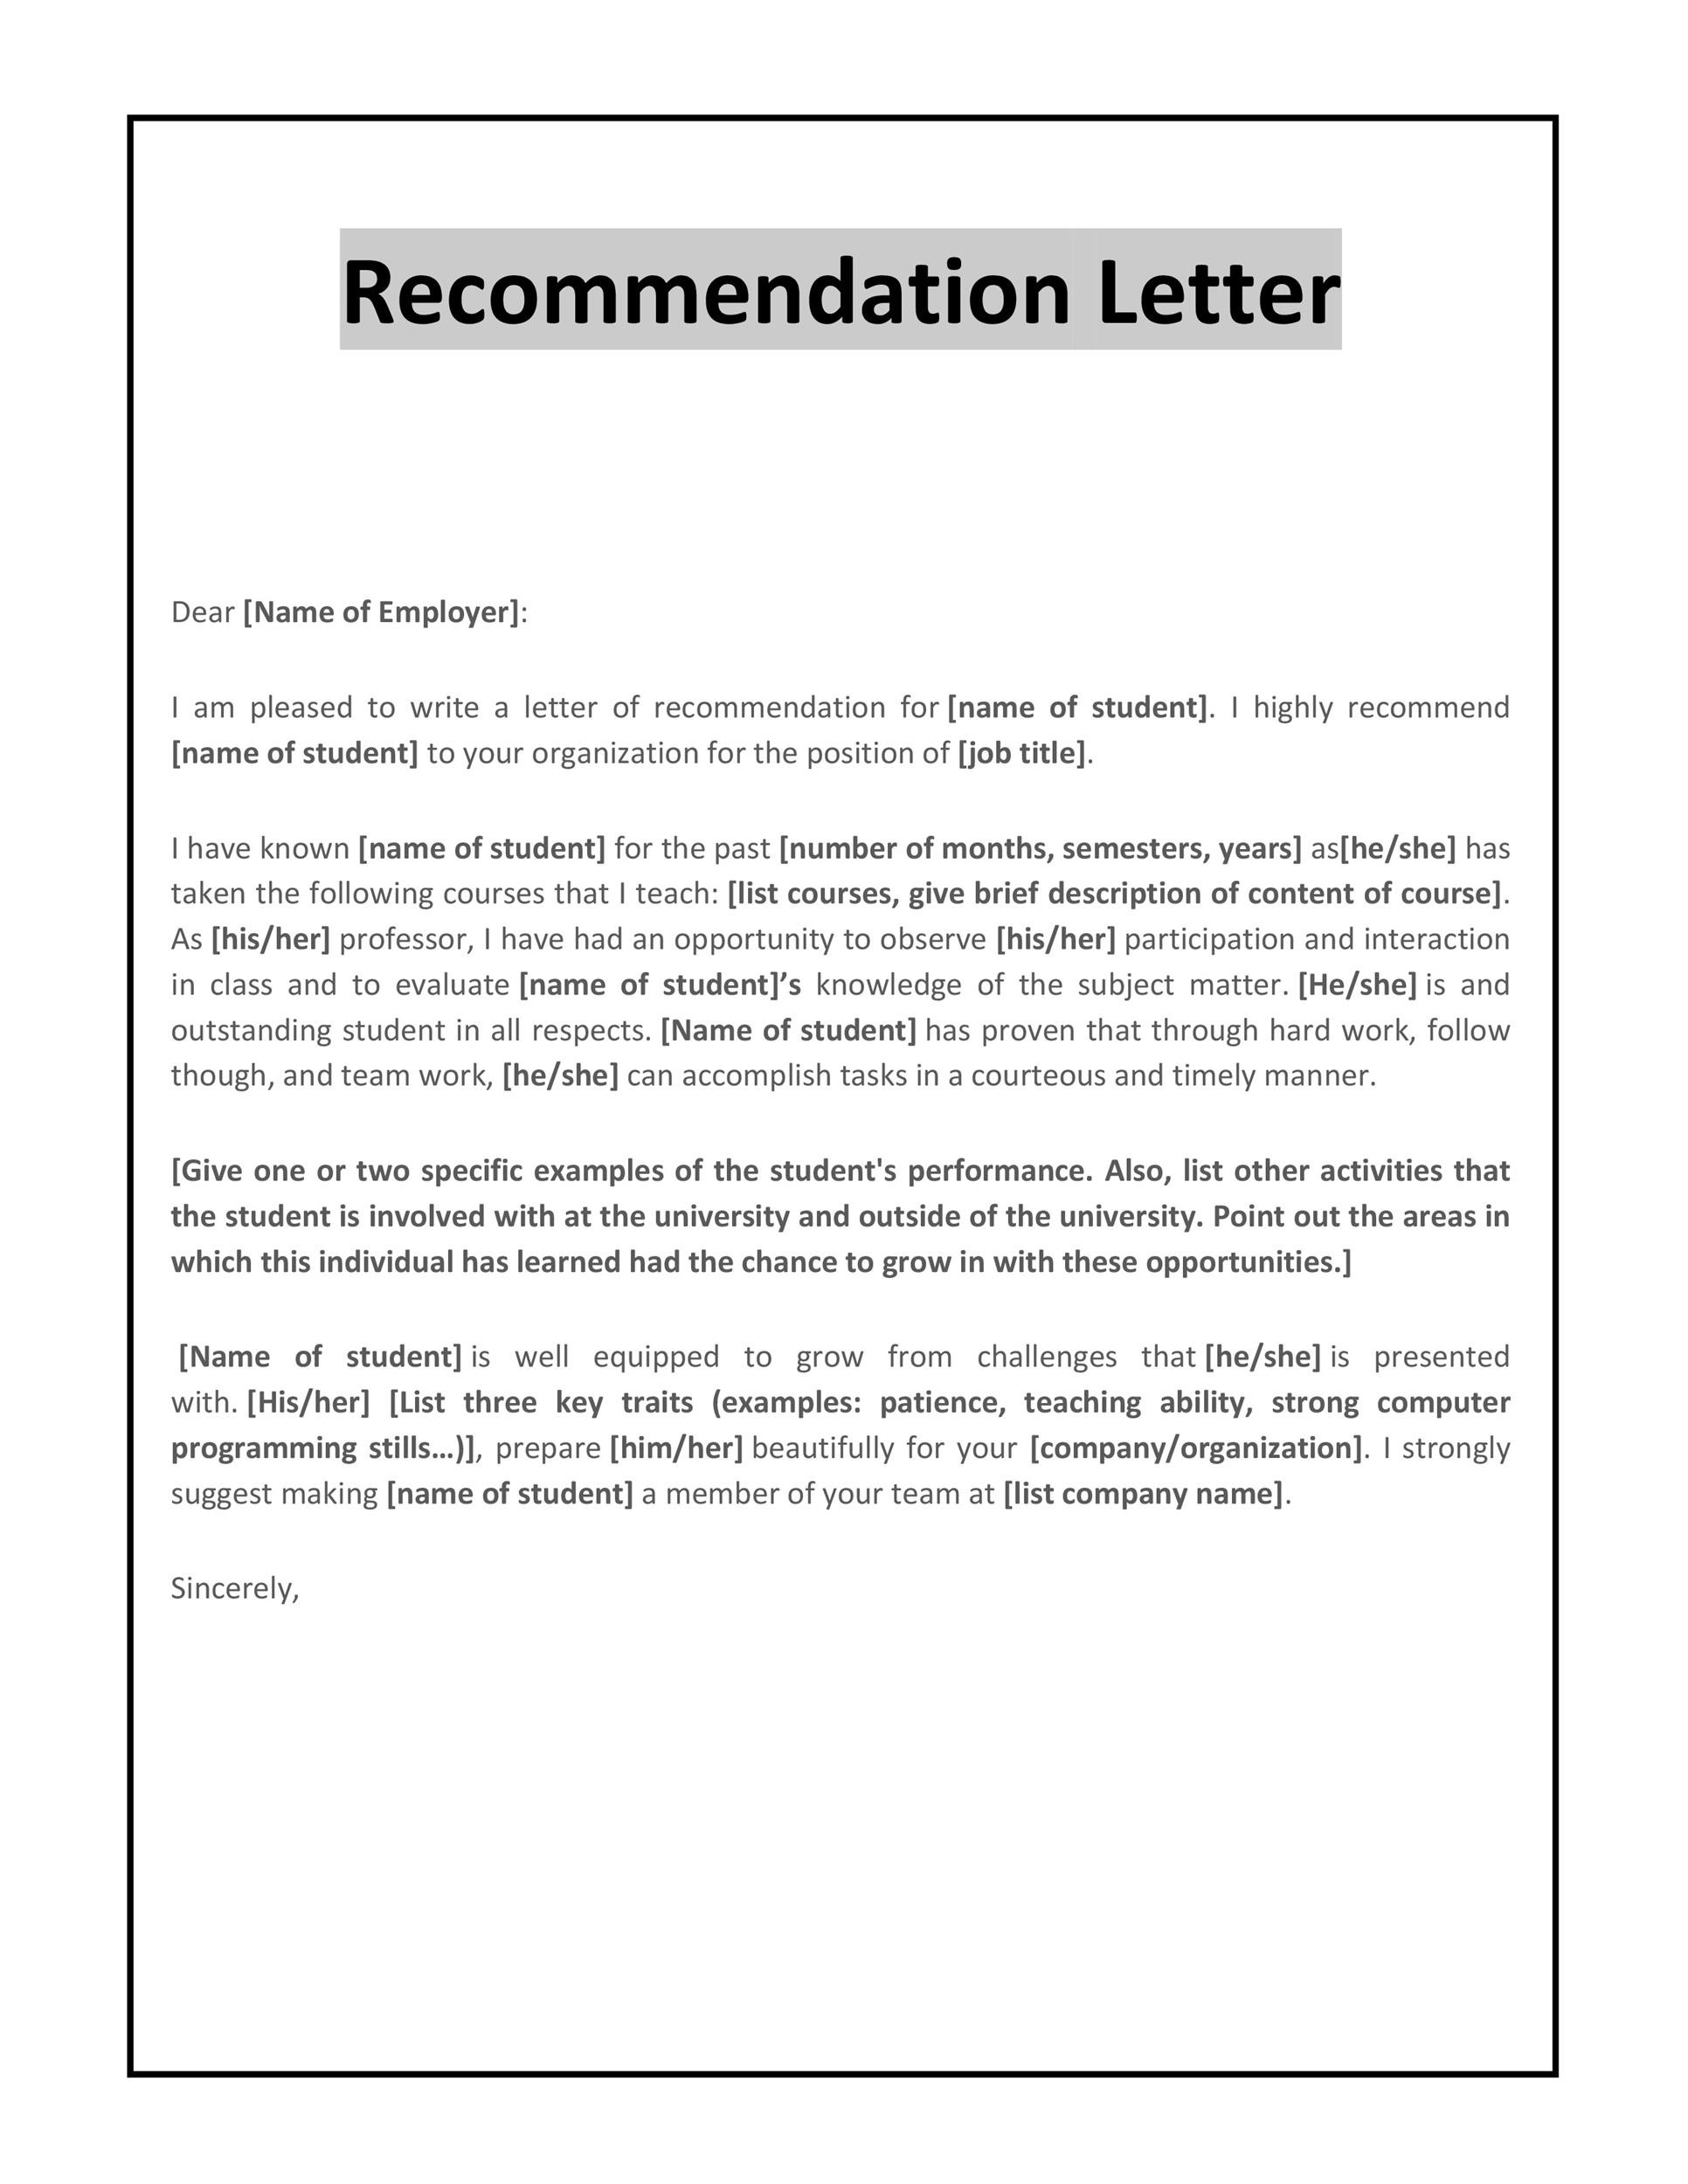 how to write an effective letter of recommendation